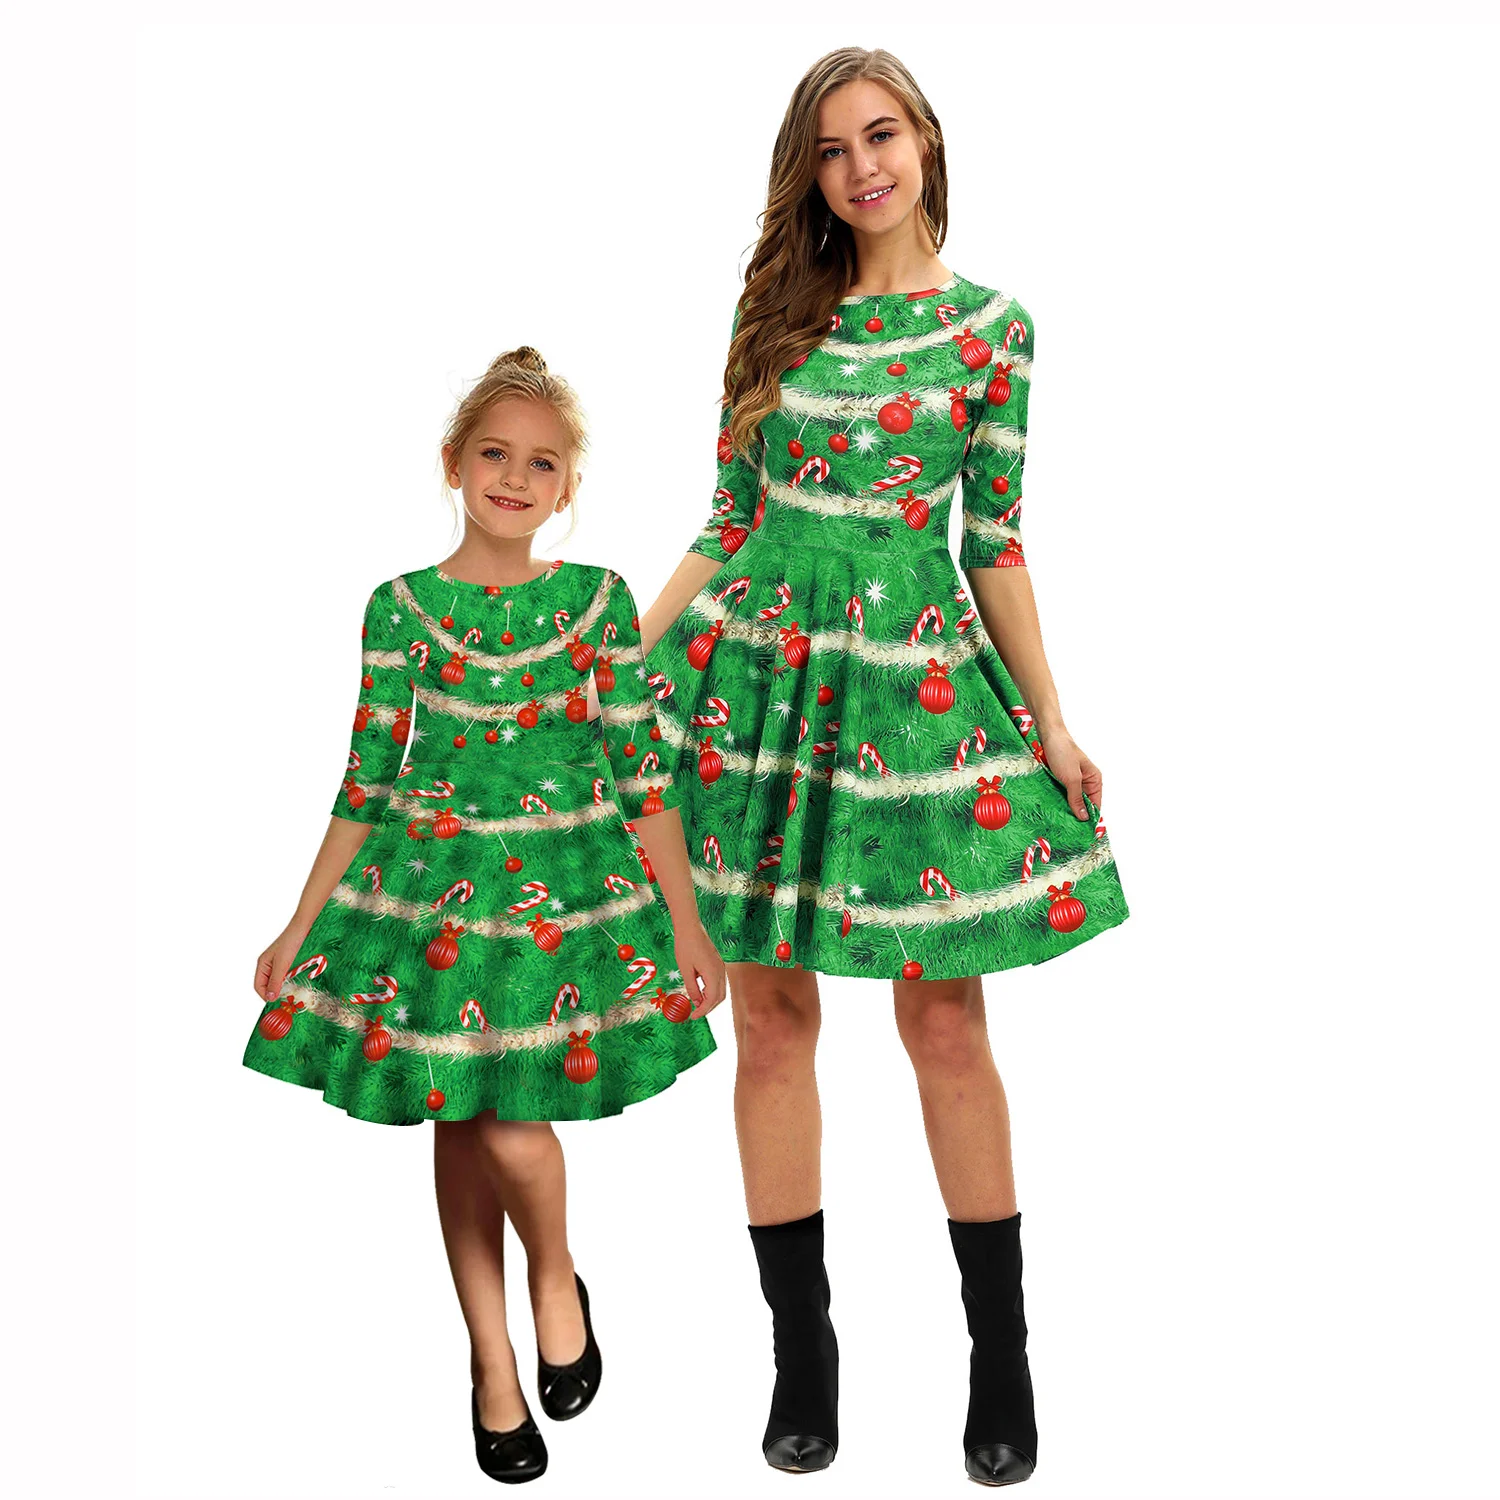 mother and baby girl matching christmas outfits